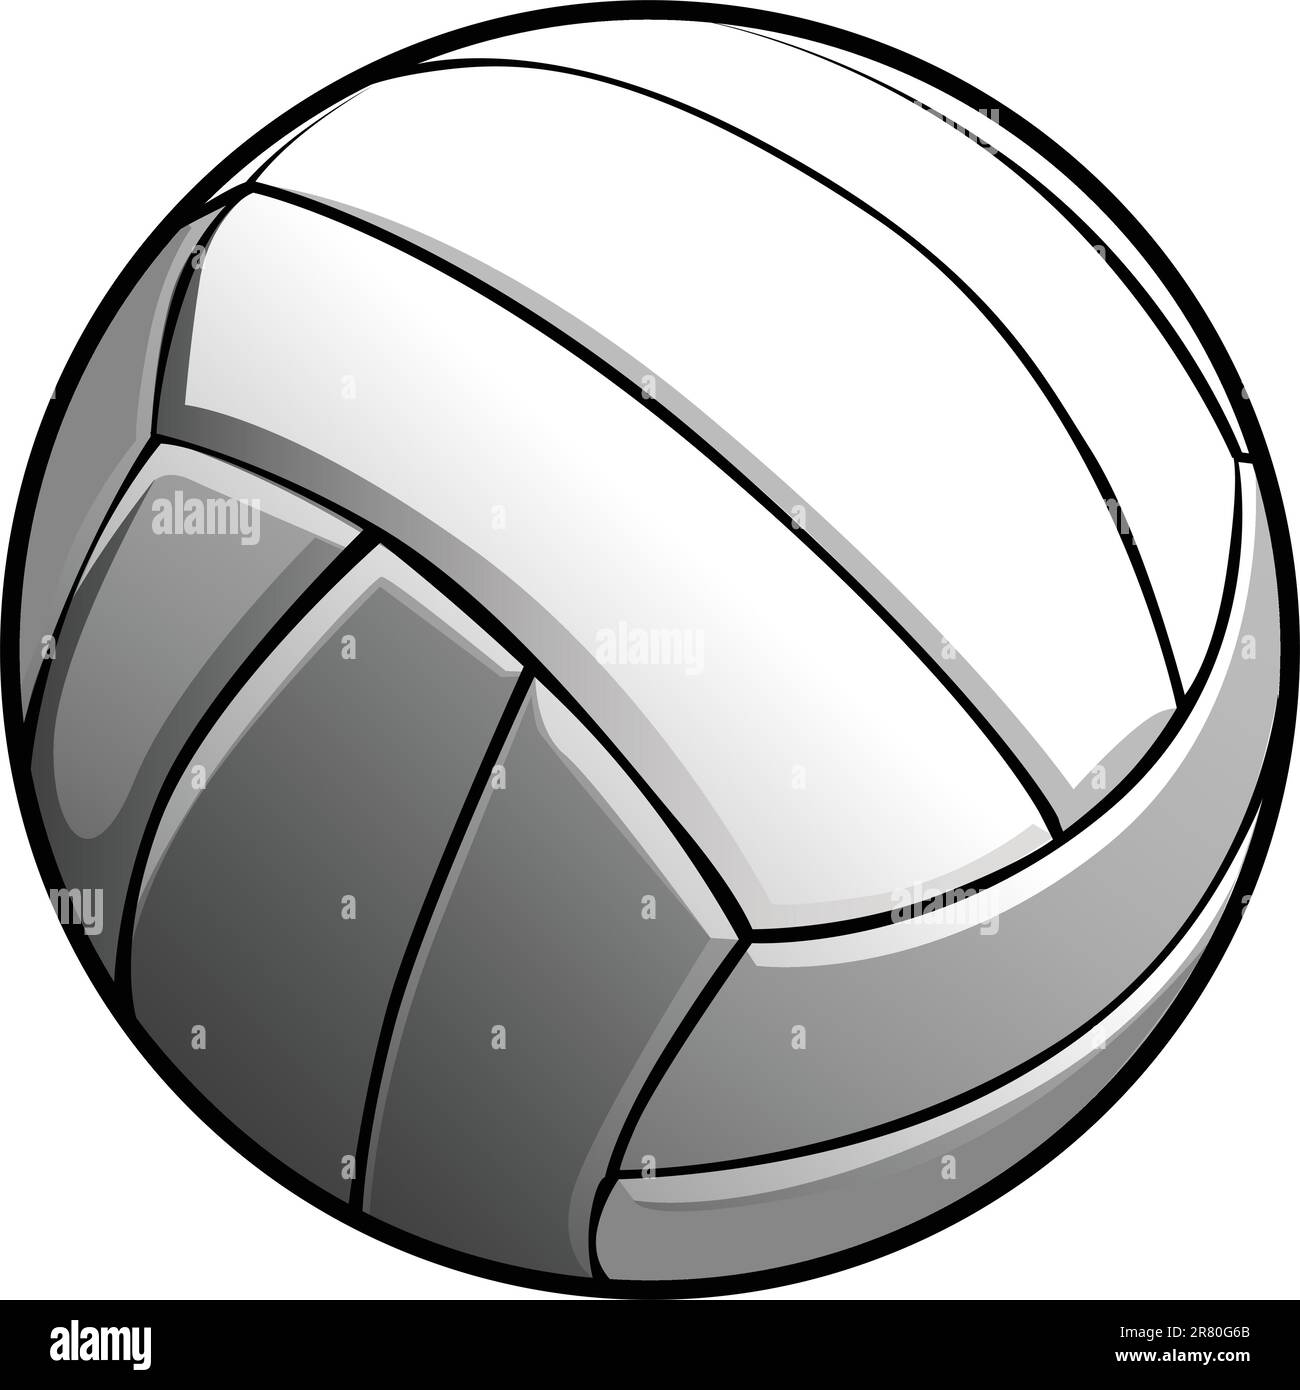 Vector Image of a Volleyball Ball Illustration Stock Vector